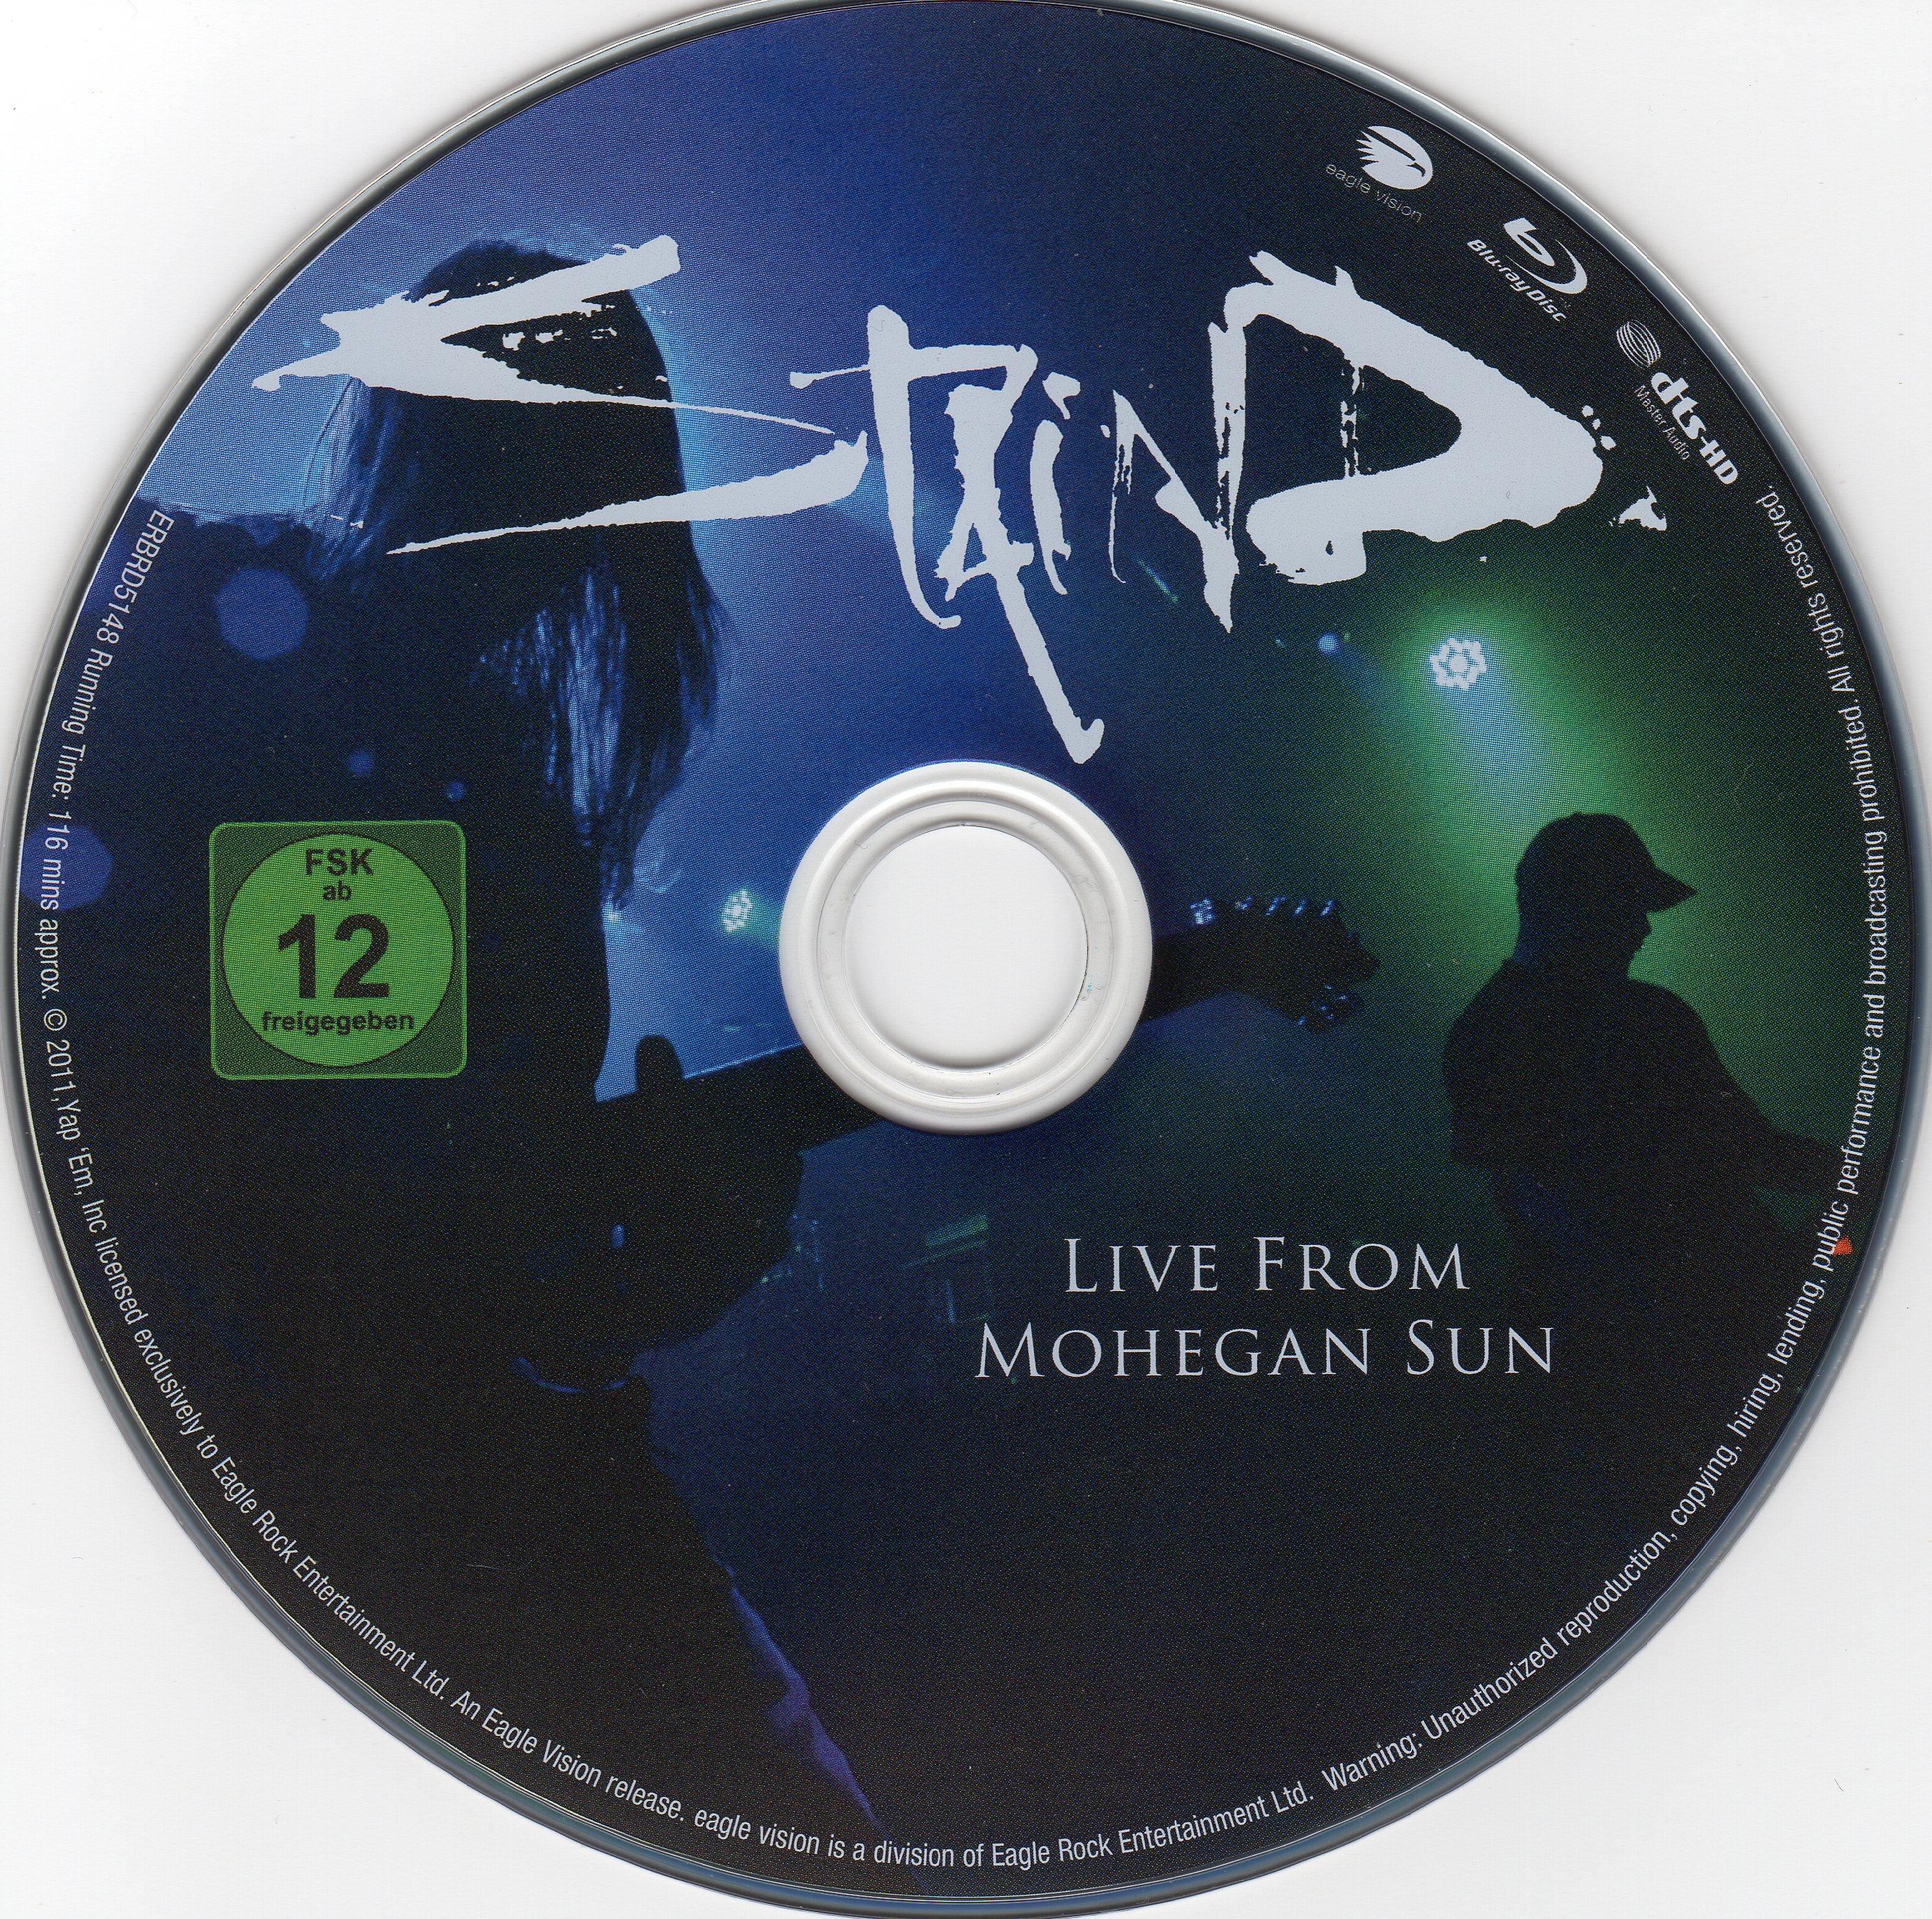 Staind Live from Mohegan Sun cd